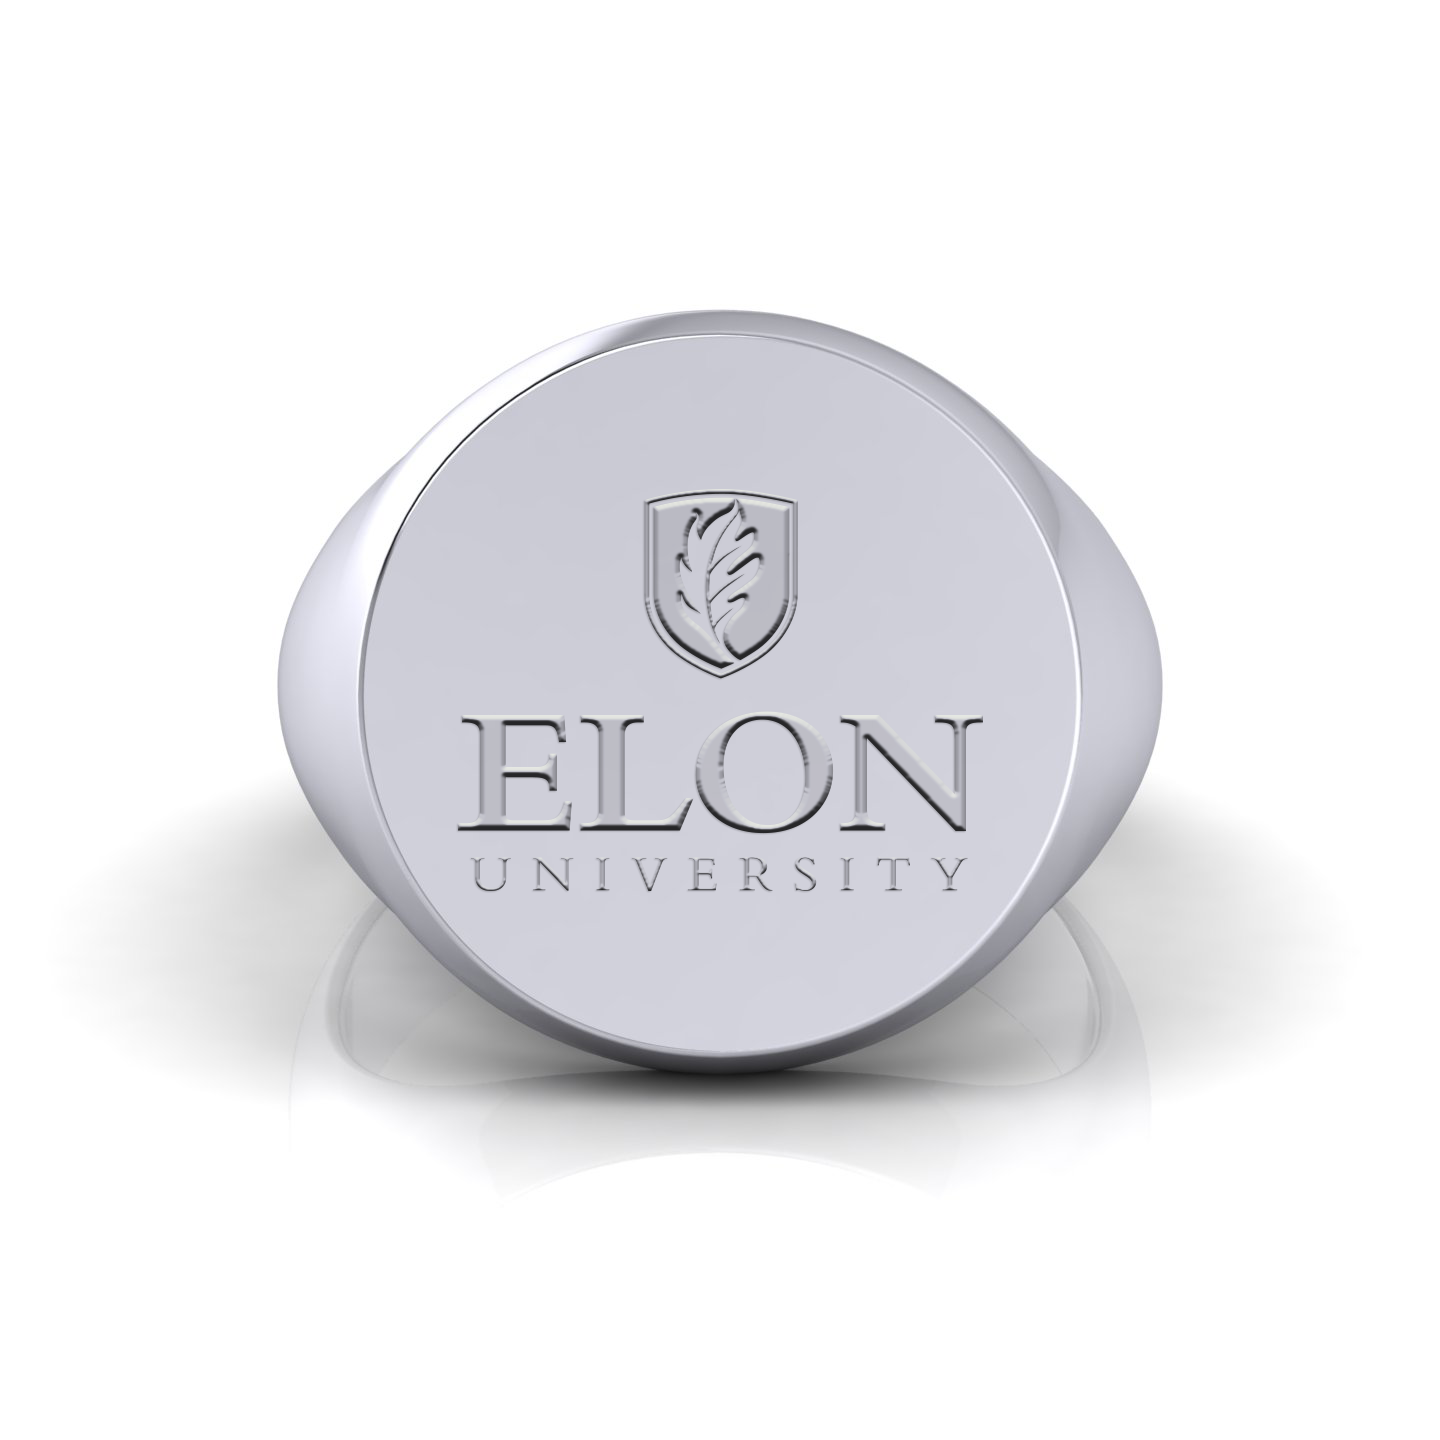 This image shows the front view of the Elon University Statement Class Ring in sterling silver. The ring is made of high-quality silver and features a beautiful design. The logo is a bold and eye-catching way to show your pride in Elon University.